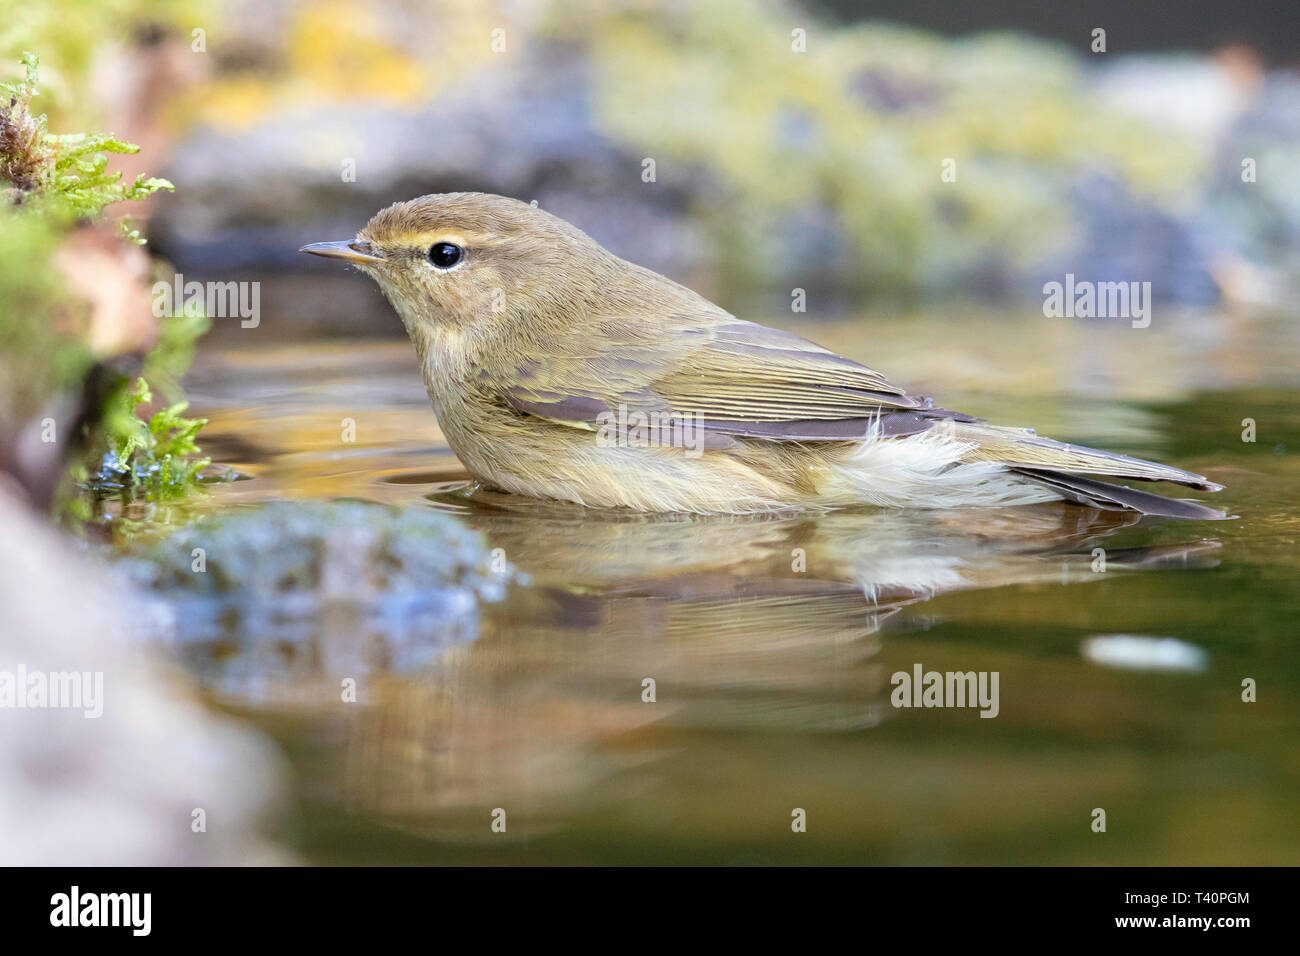 Common Chiffchaff (Phylloscopus collybita), side view of an adult taking a bath Stock Photo